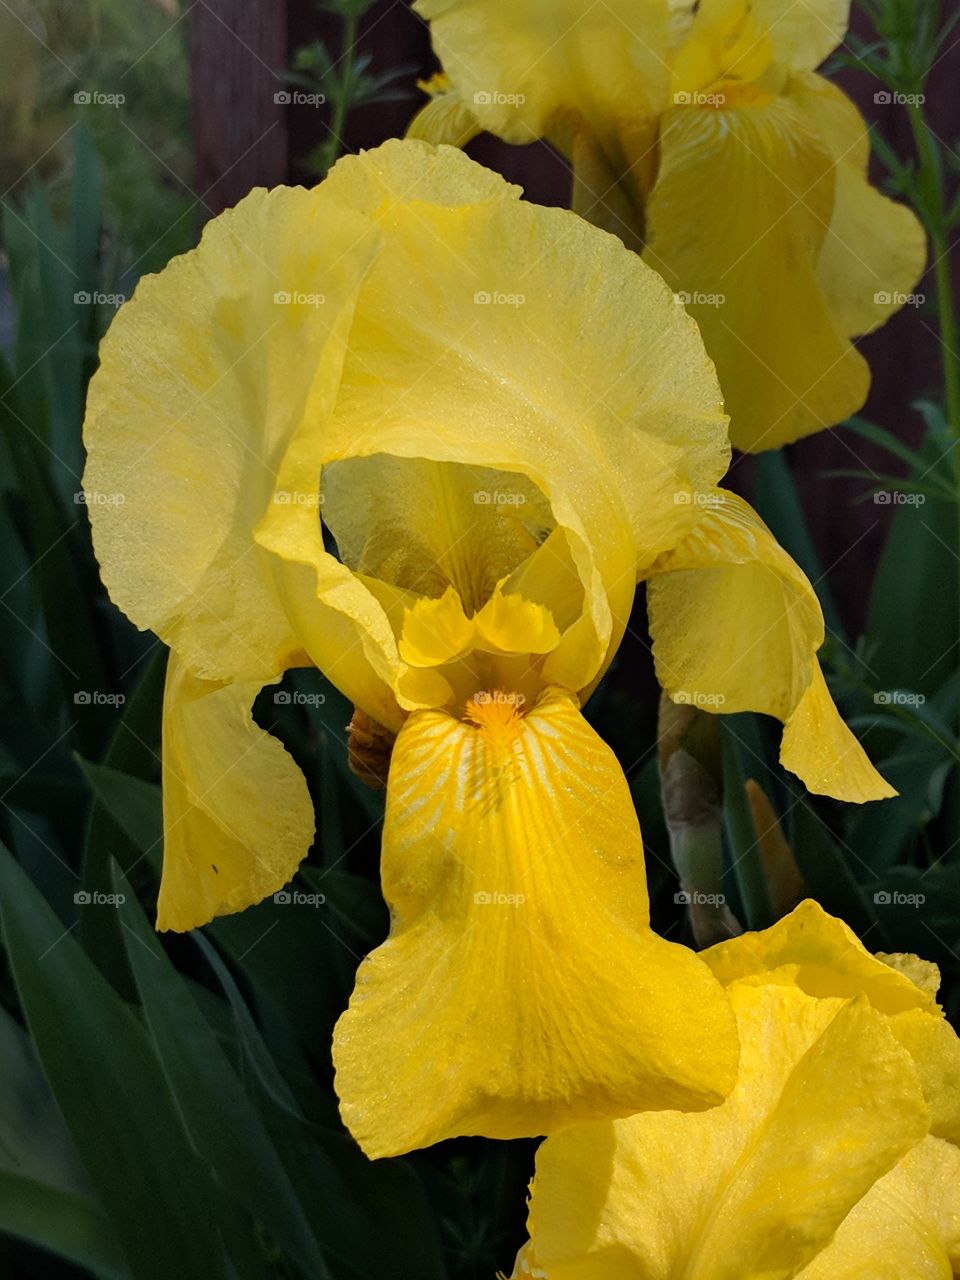 yellow daffodil close up in bloom